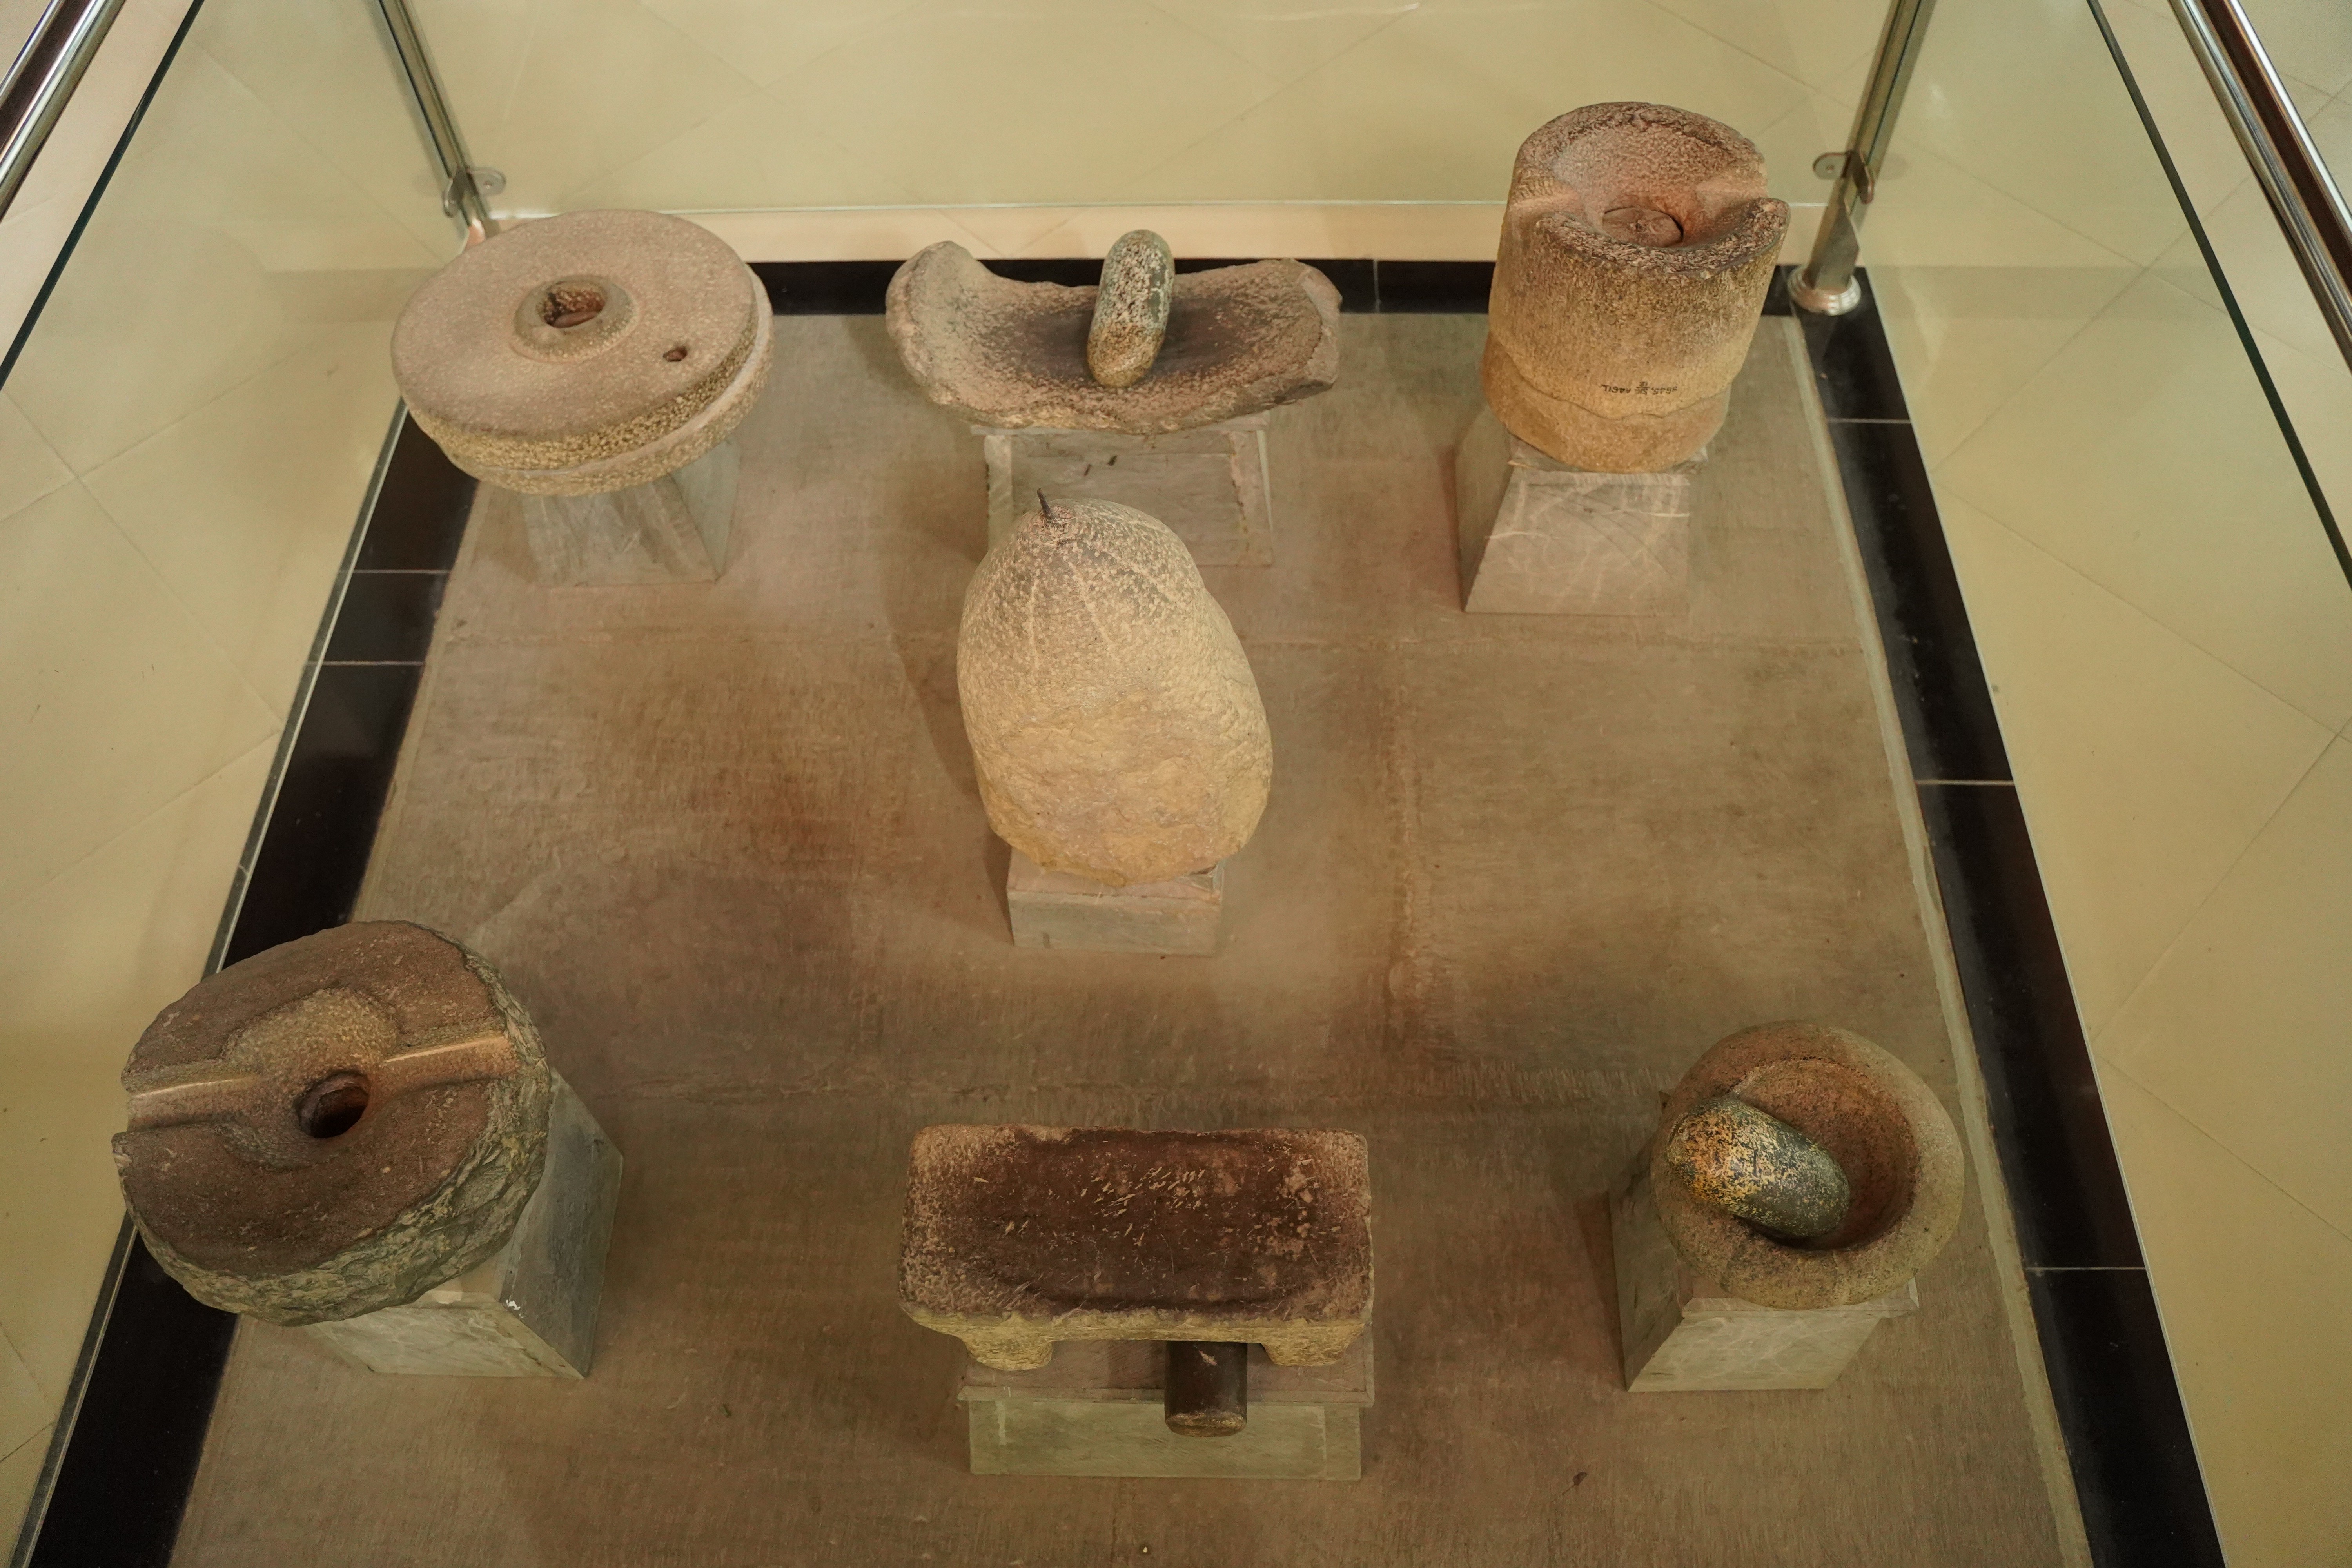 Collection of ancient kitchen accessories including the spice grinder and hand mill